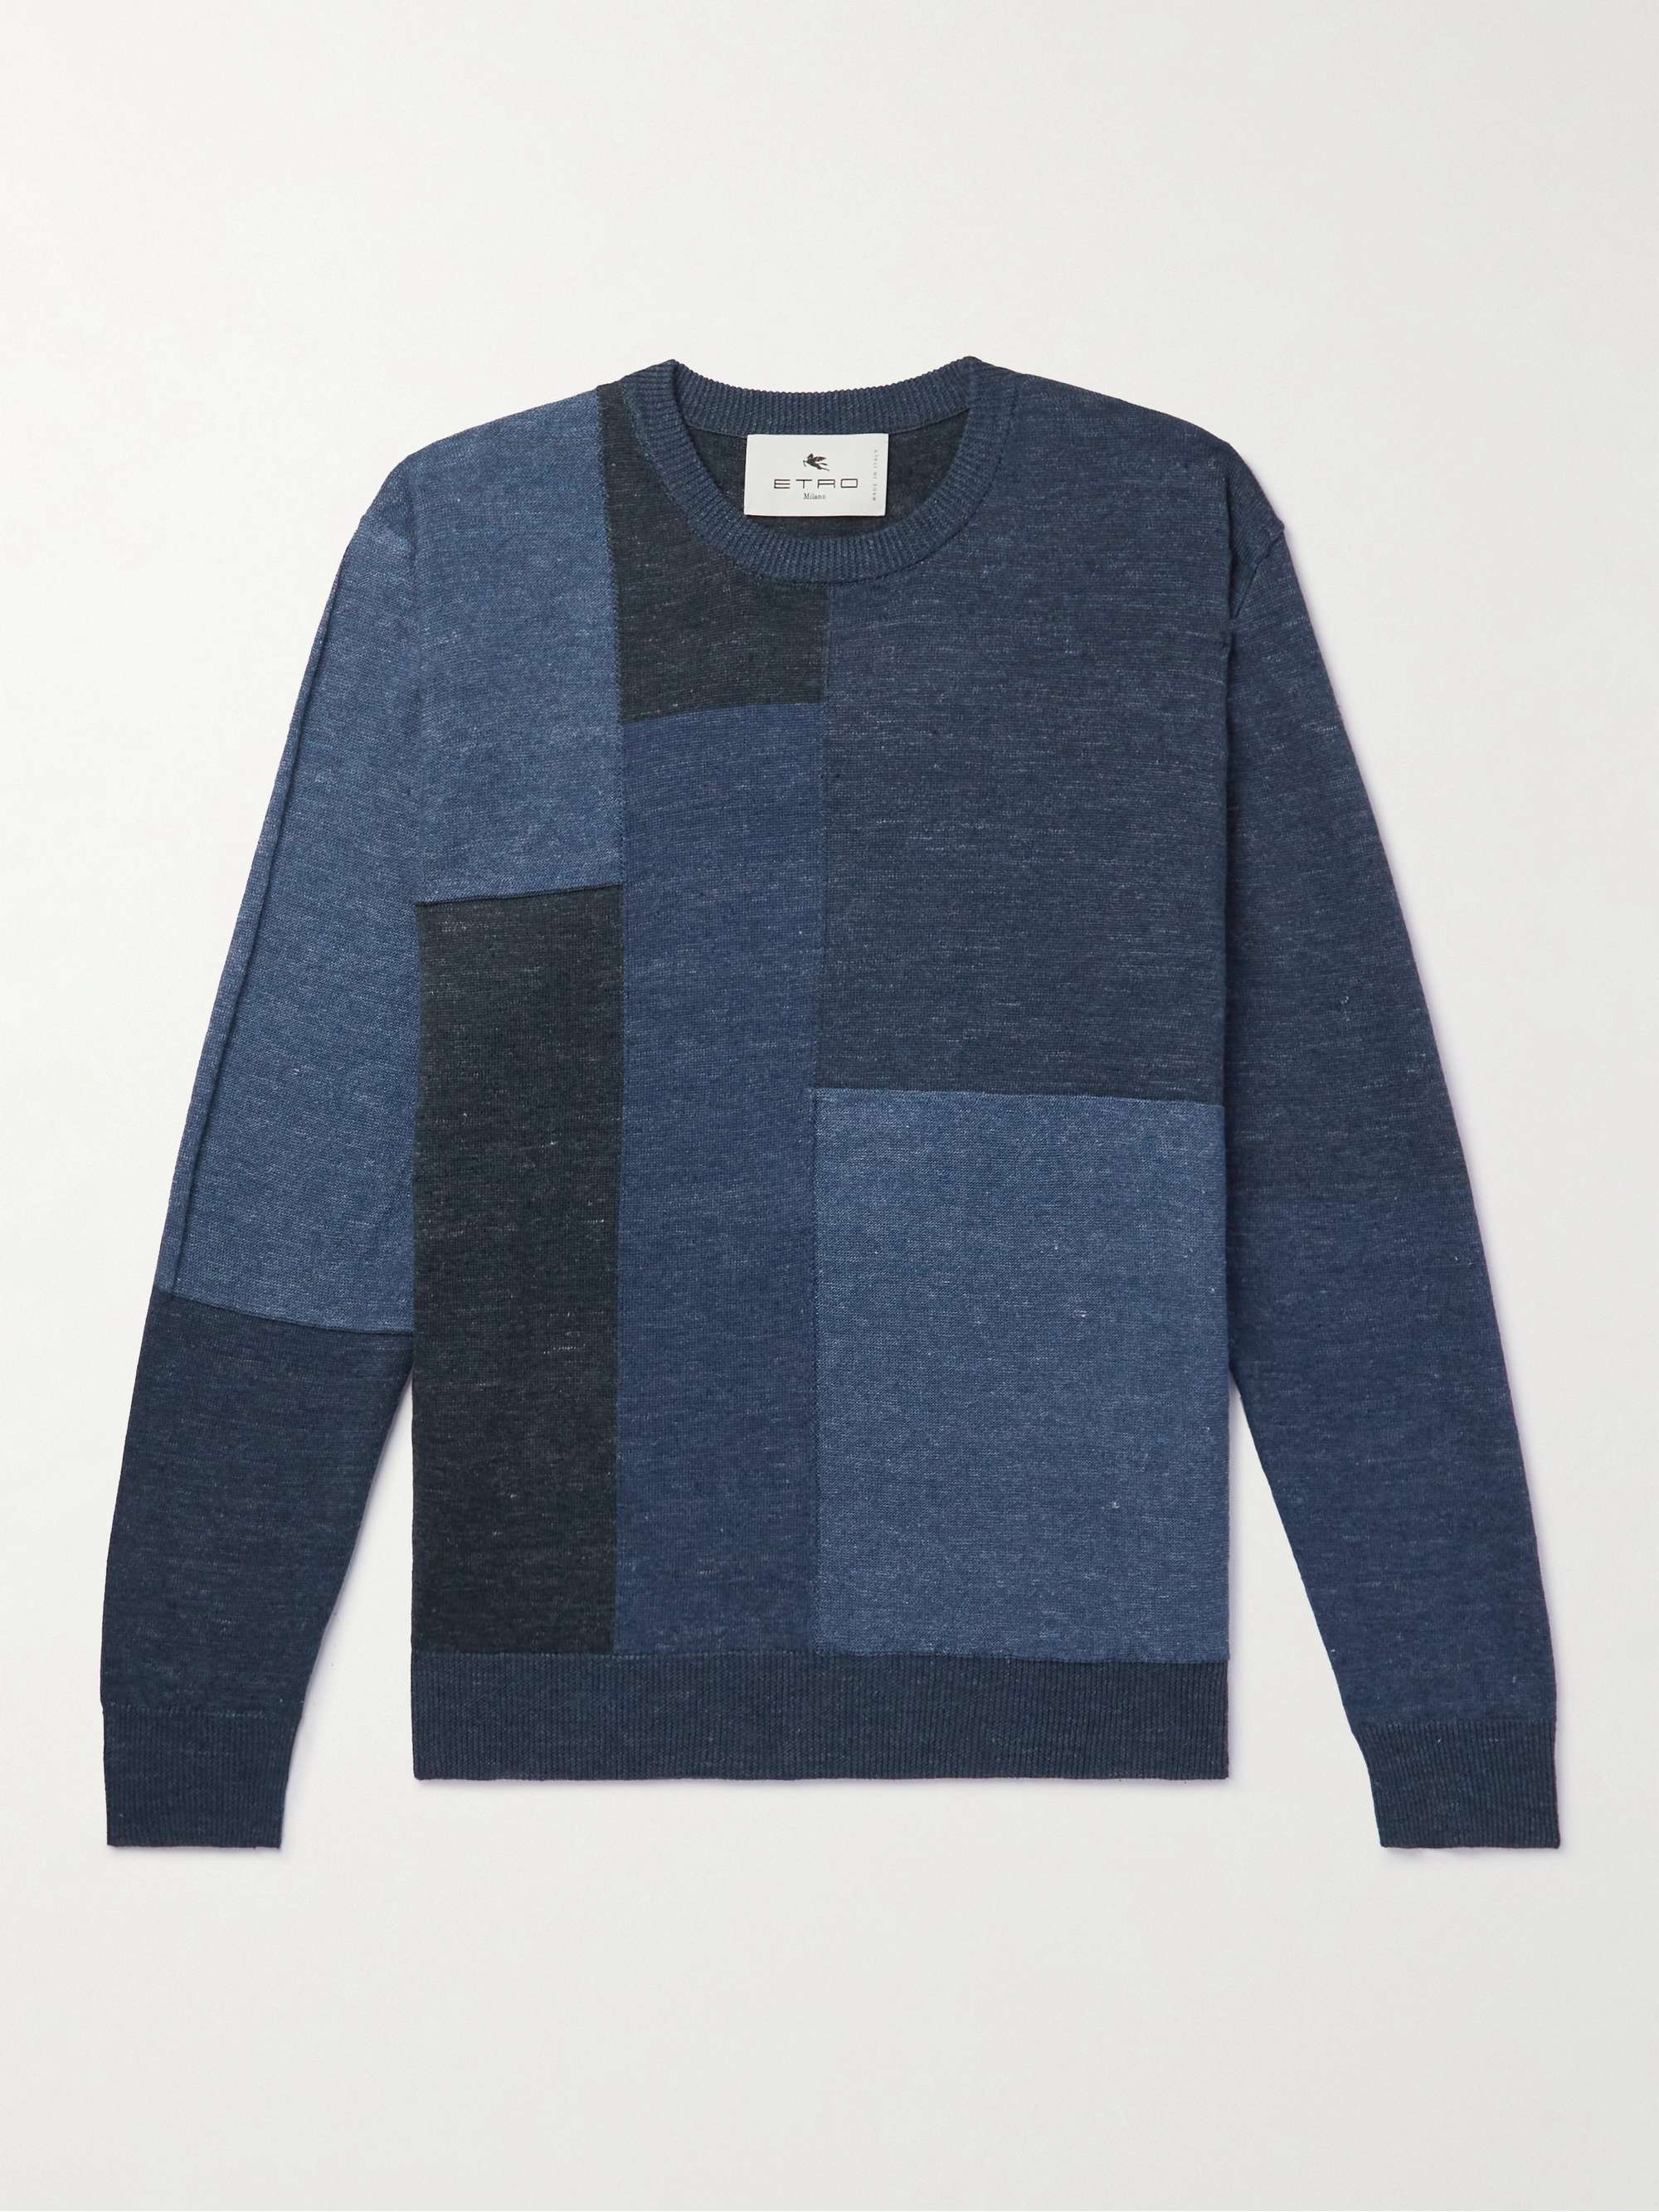 ETRO Patchwork Linen and Cotton-Blend Sweater | MR PORTER